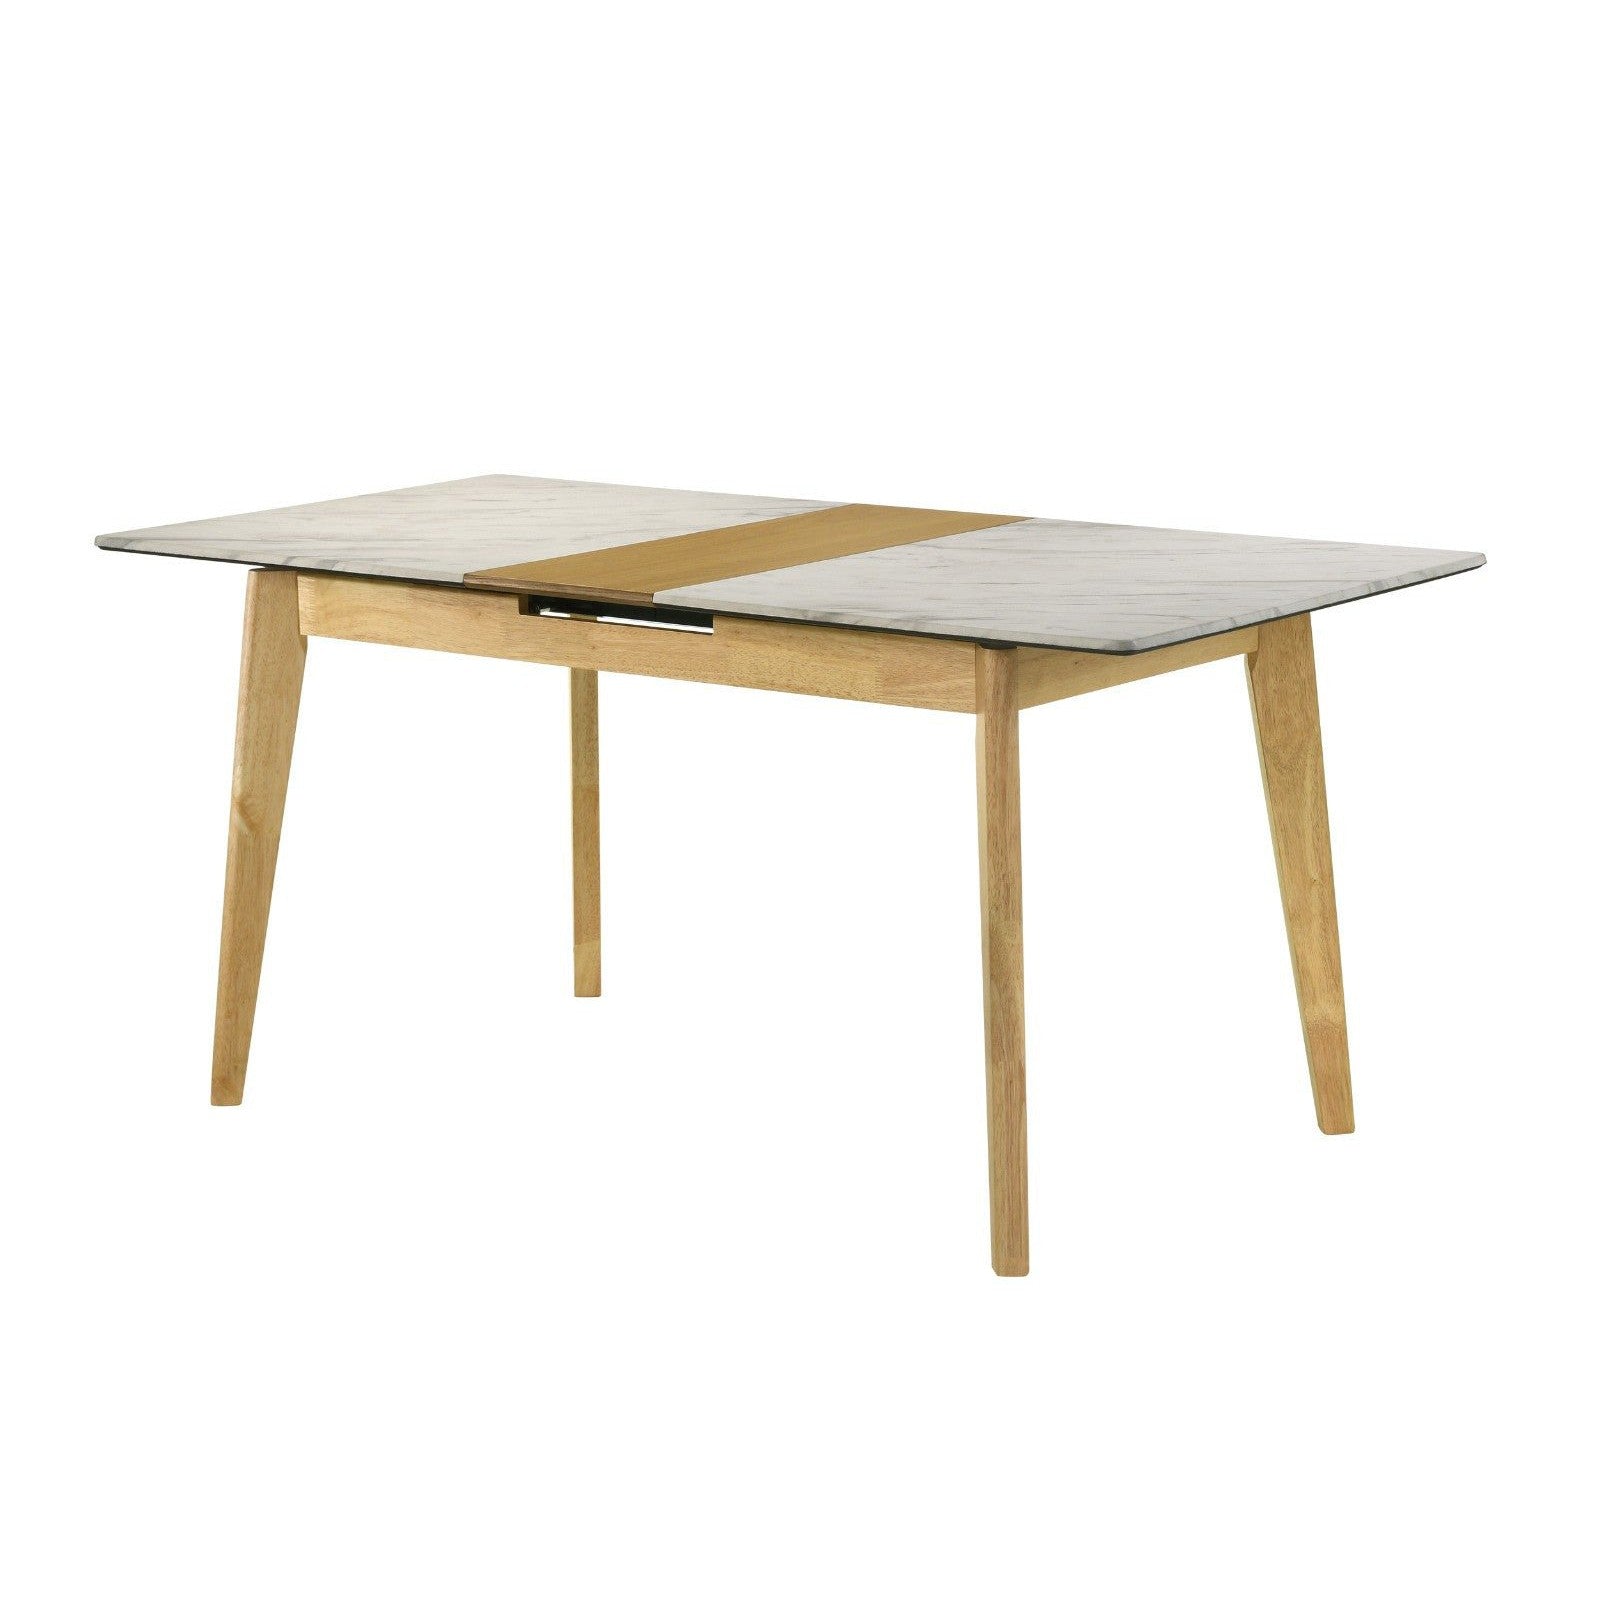 Kingsbury Extension Table - Unica Interior